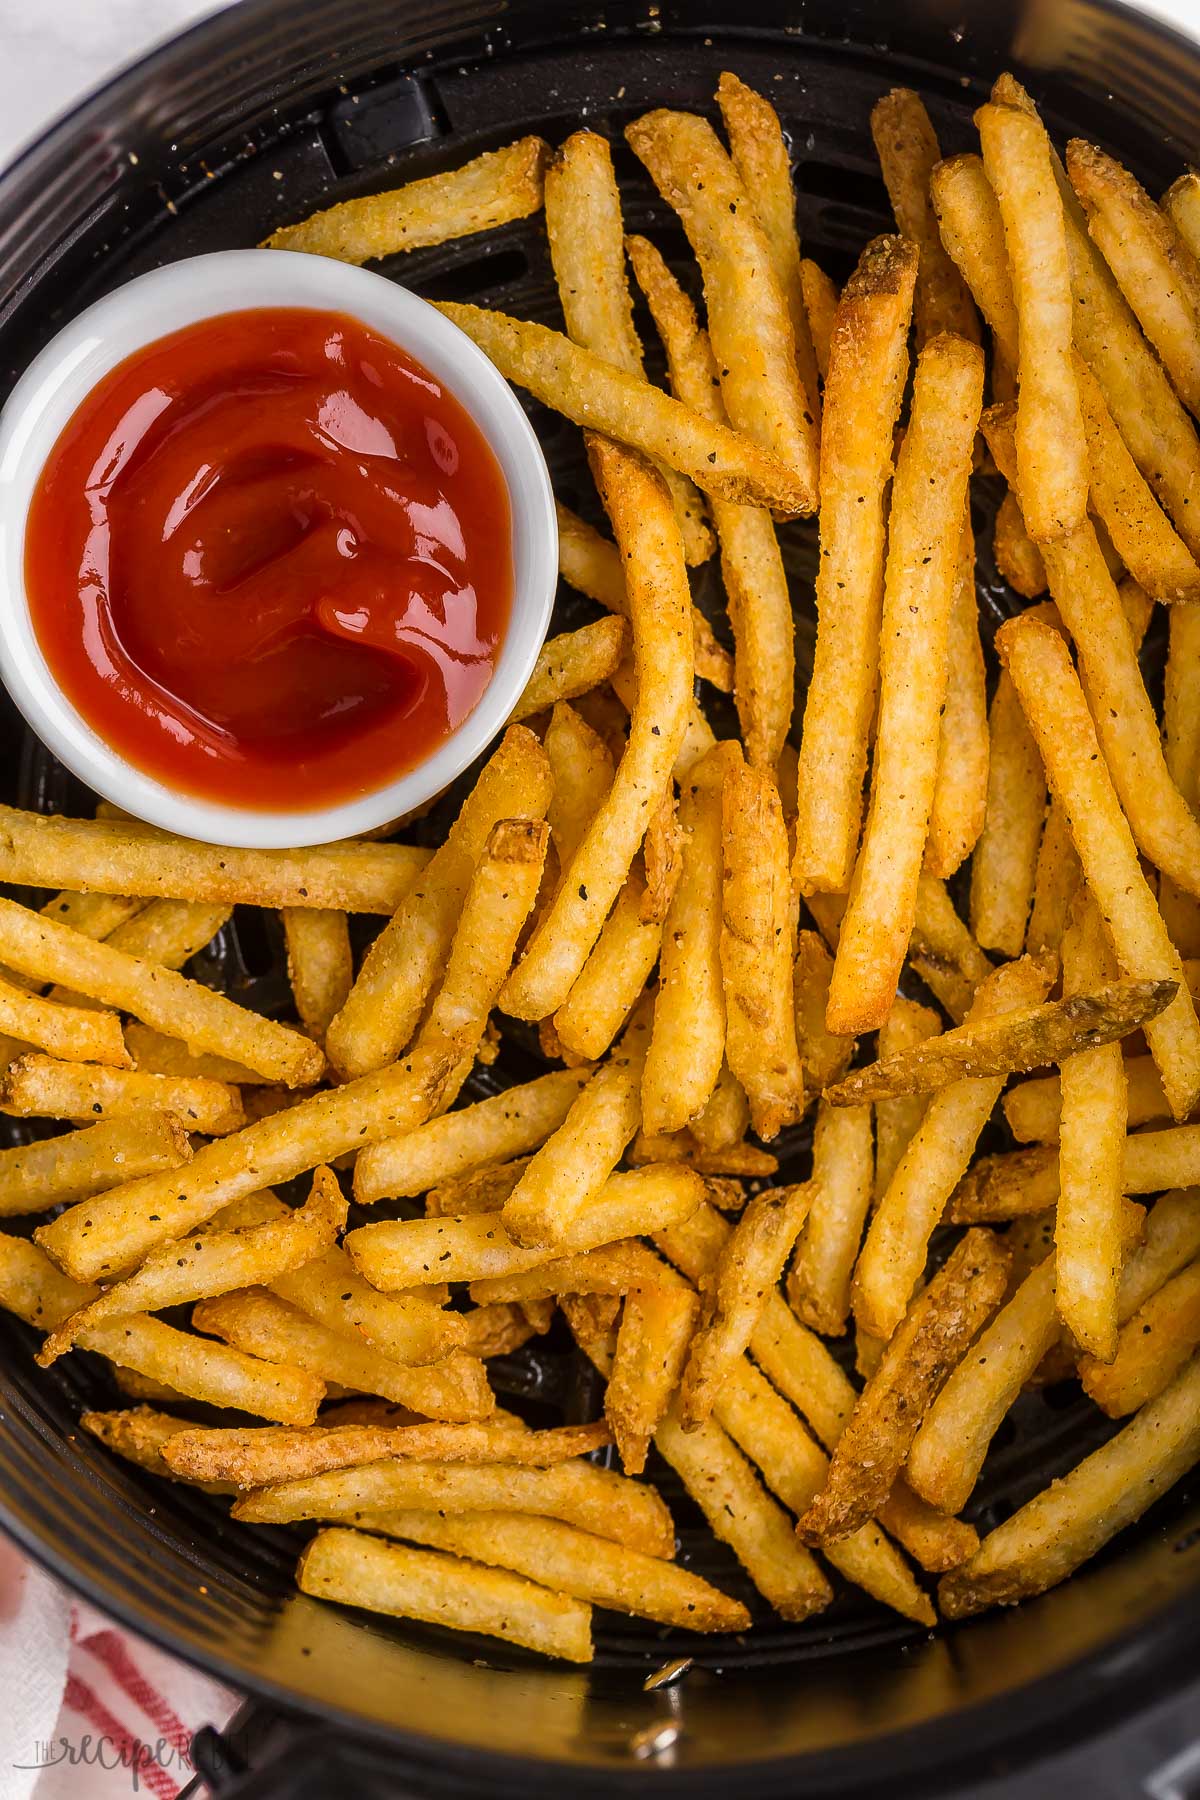 frozen french fries in air fryer with small bowl of ketchup.